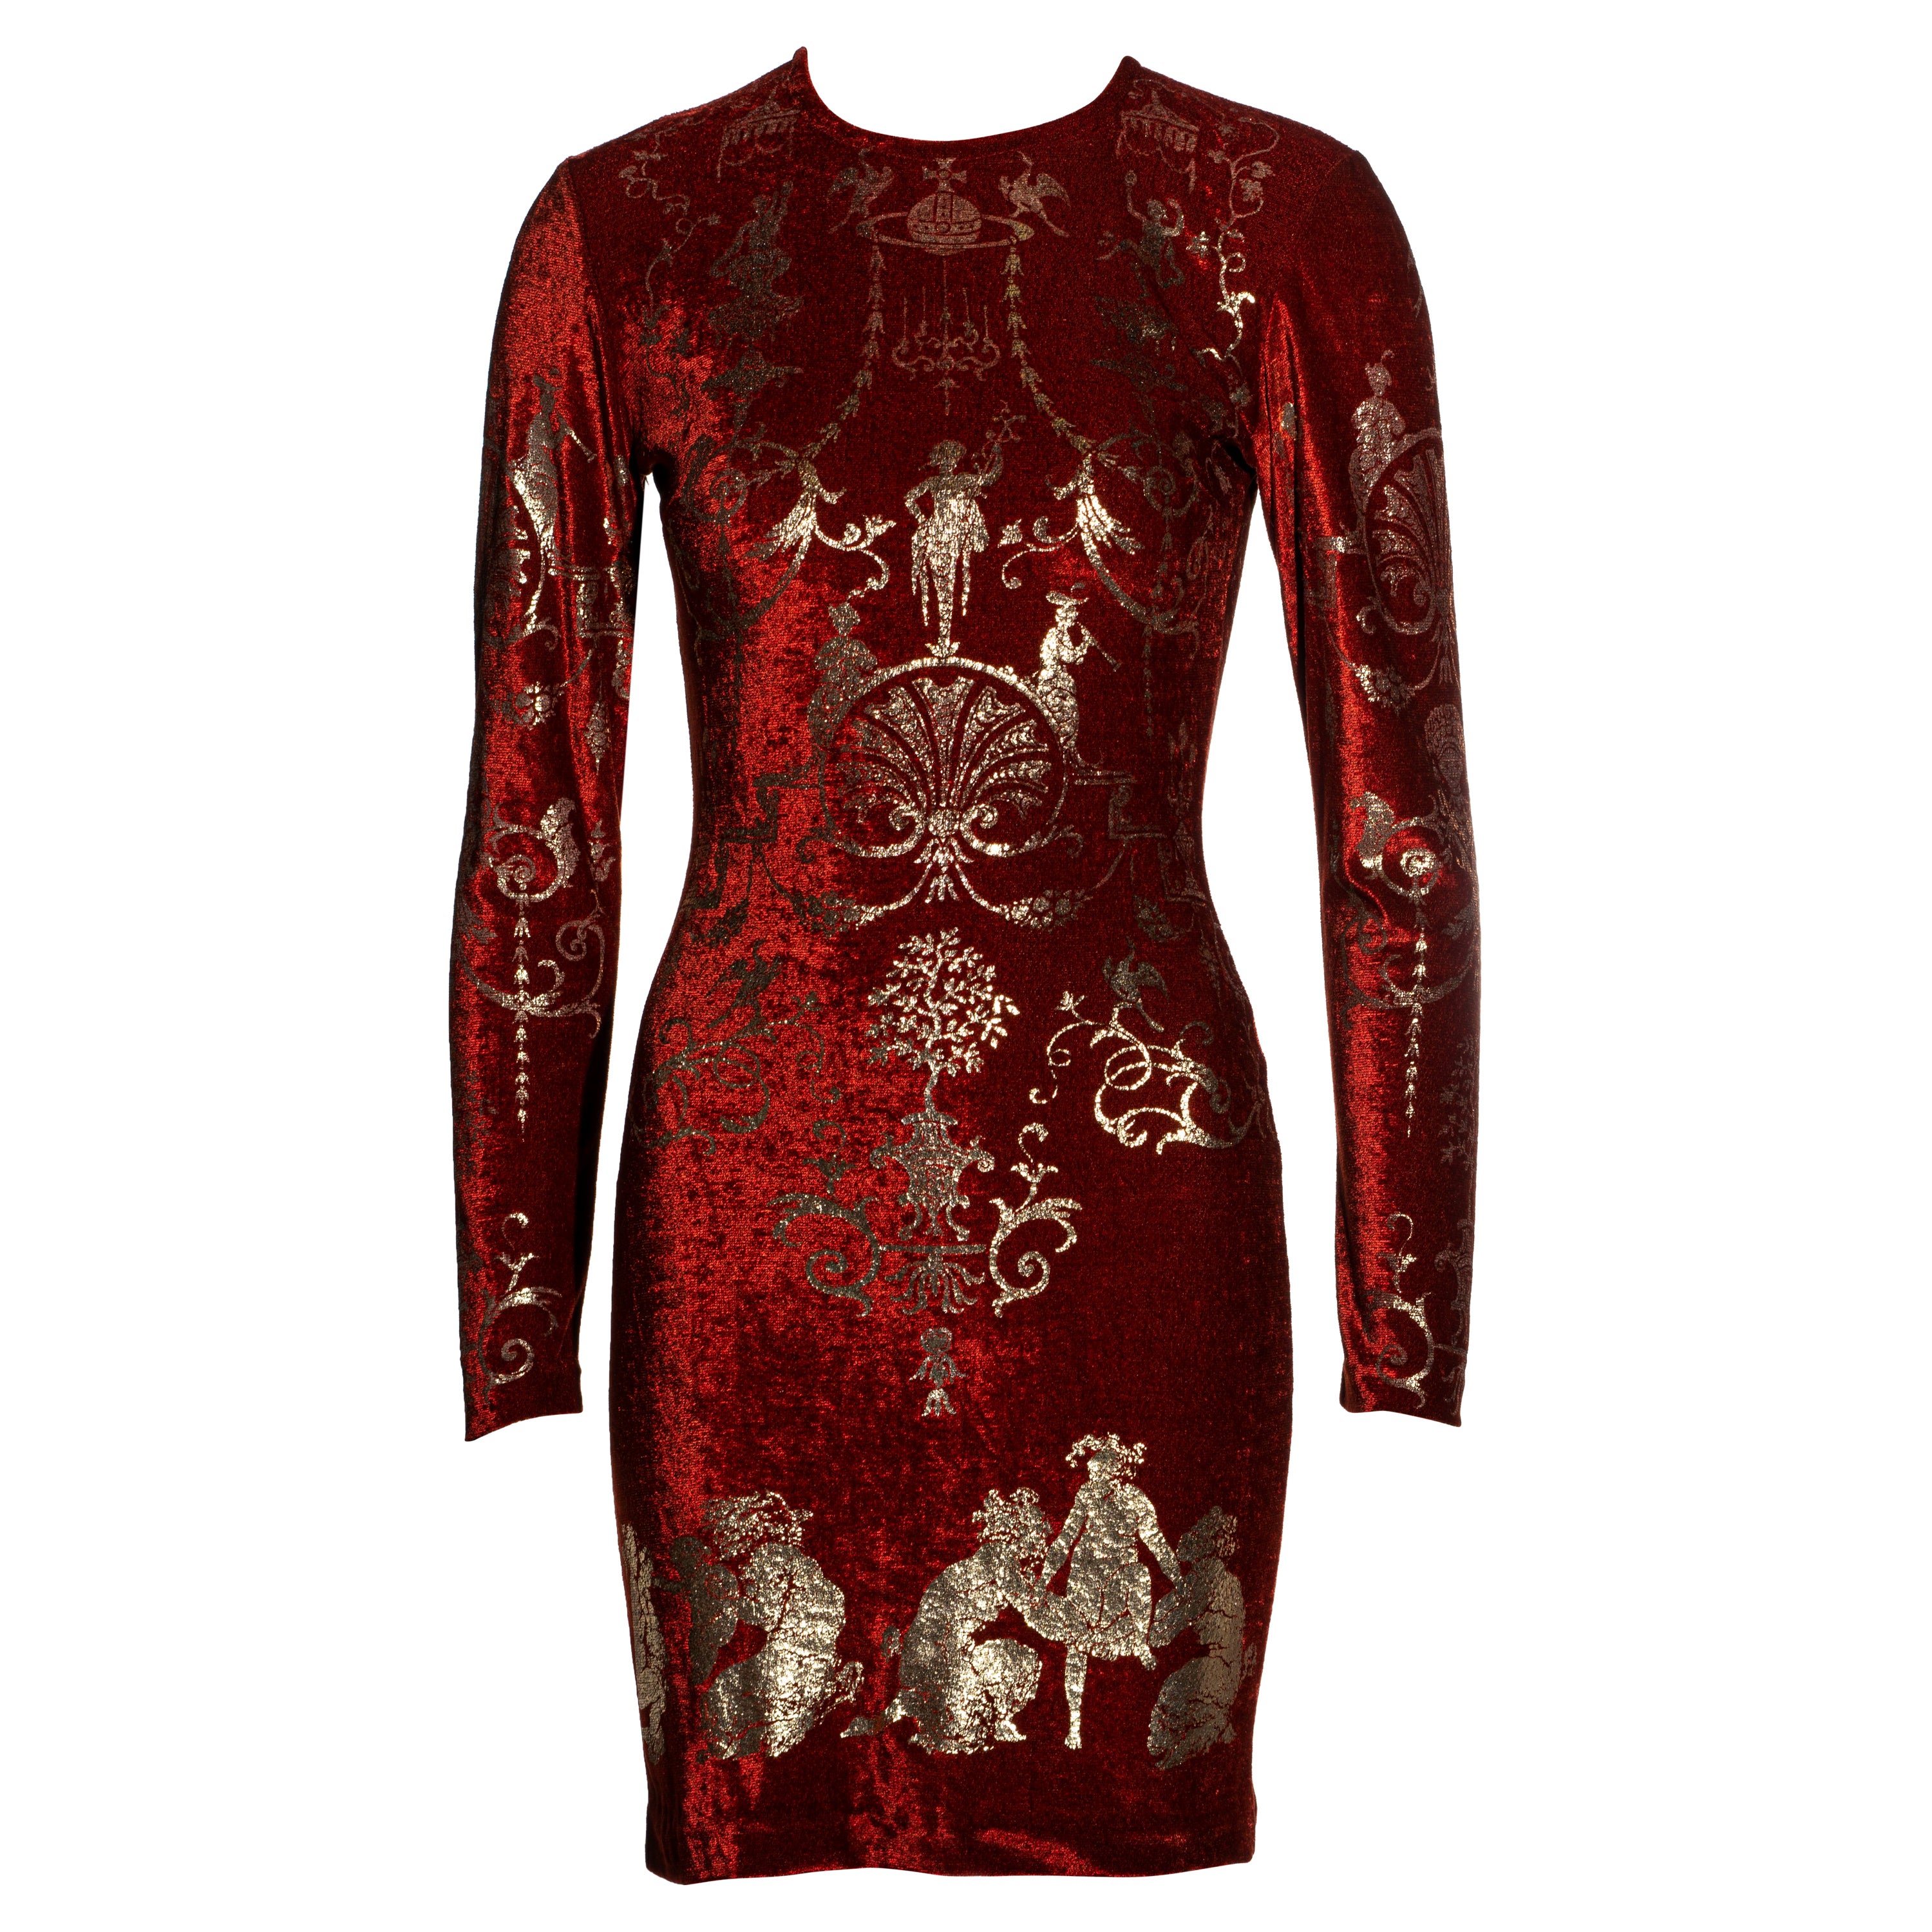 Vivienne Westwood red velvet bodycon dress with gold foil print, fw 1991